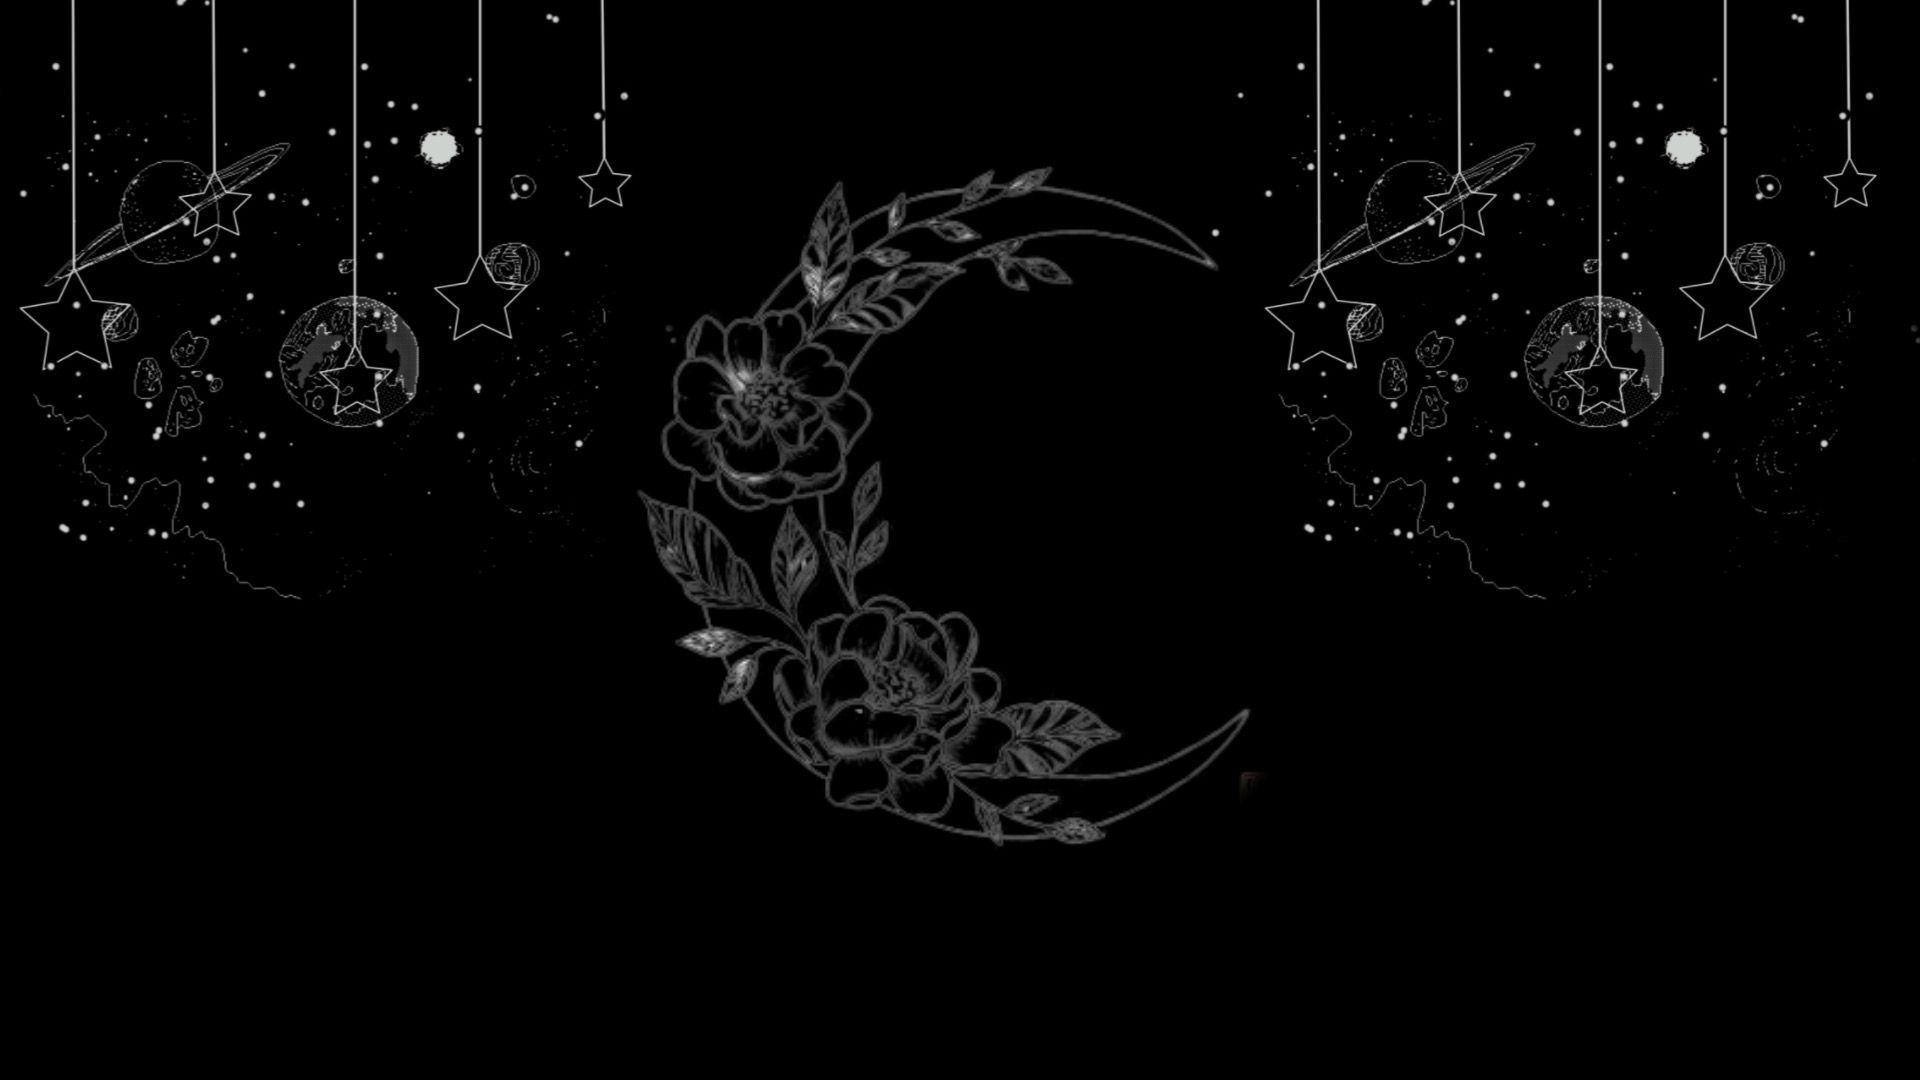 Moon and Stars. Witchy wallpaper, Computer wallpaper desktop wallpaper, Cute laptop wallpaper